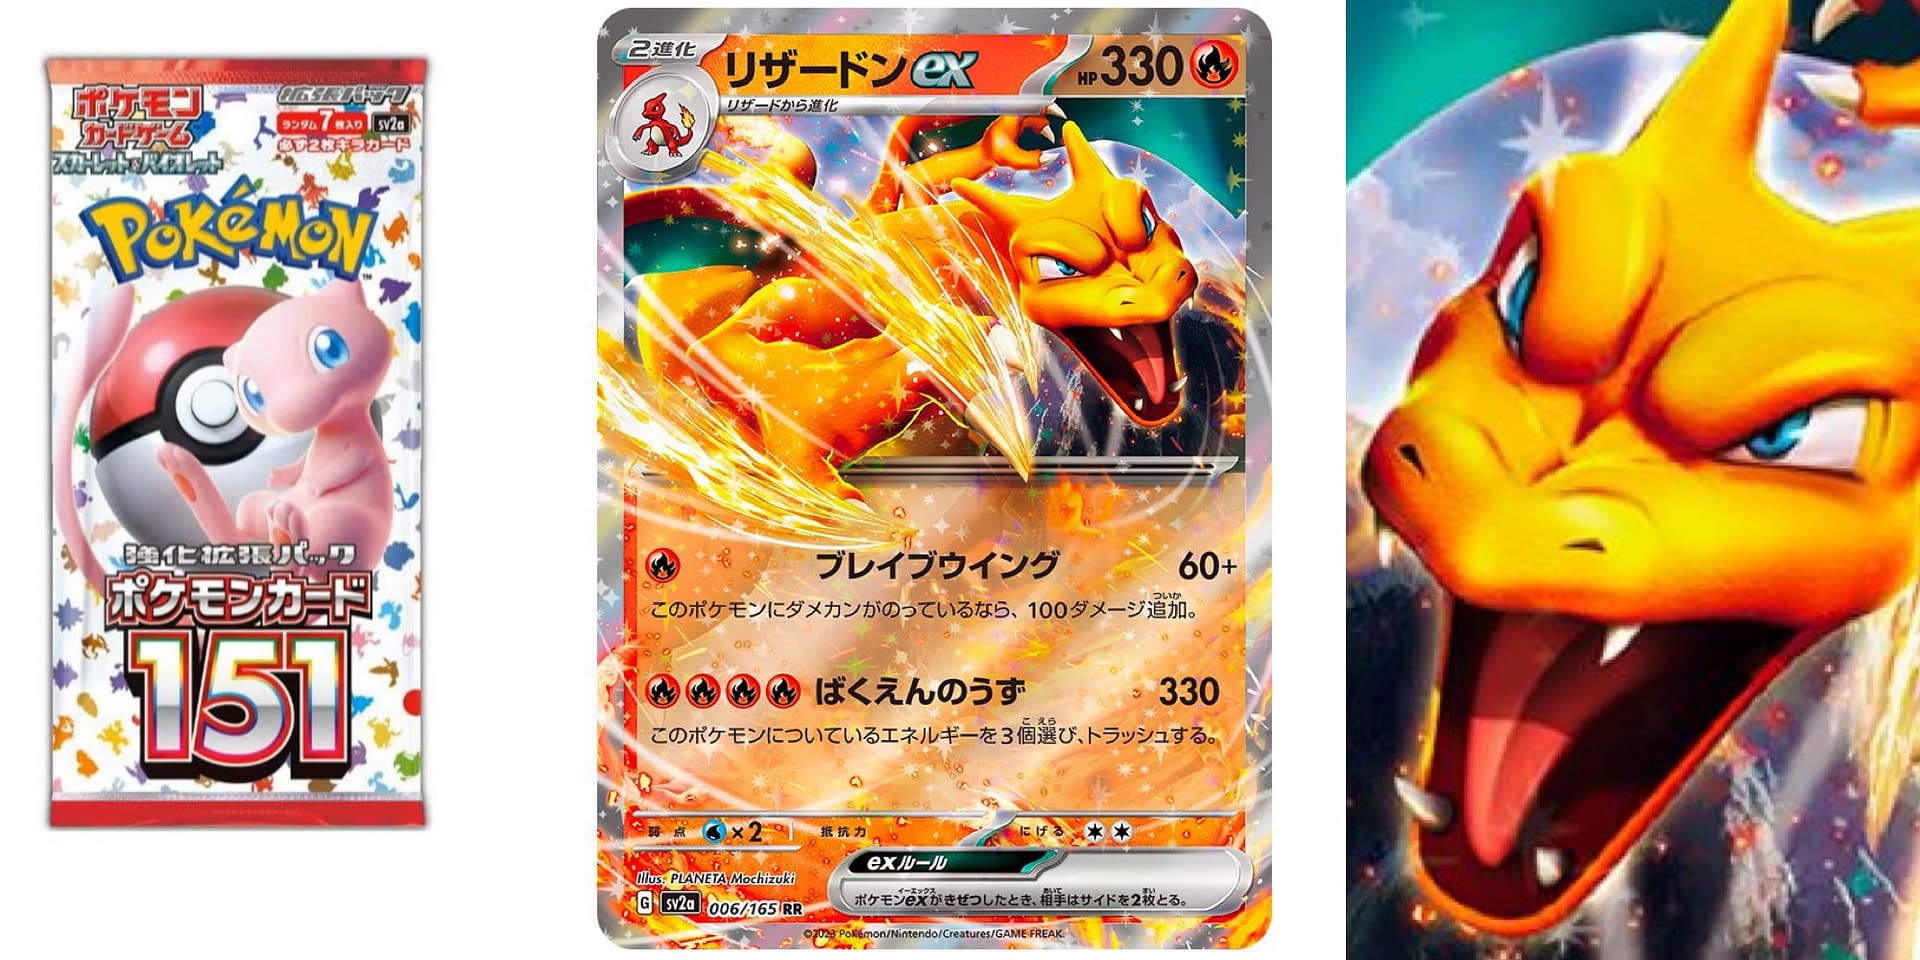 Special Pokémon 151 TCG Set Officially Confirmed for an English